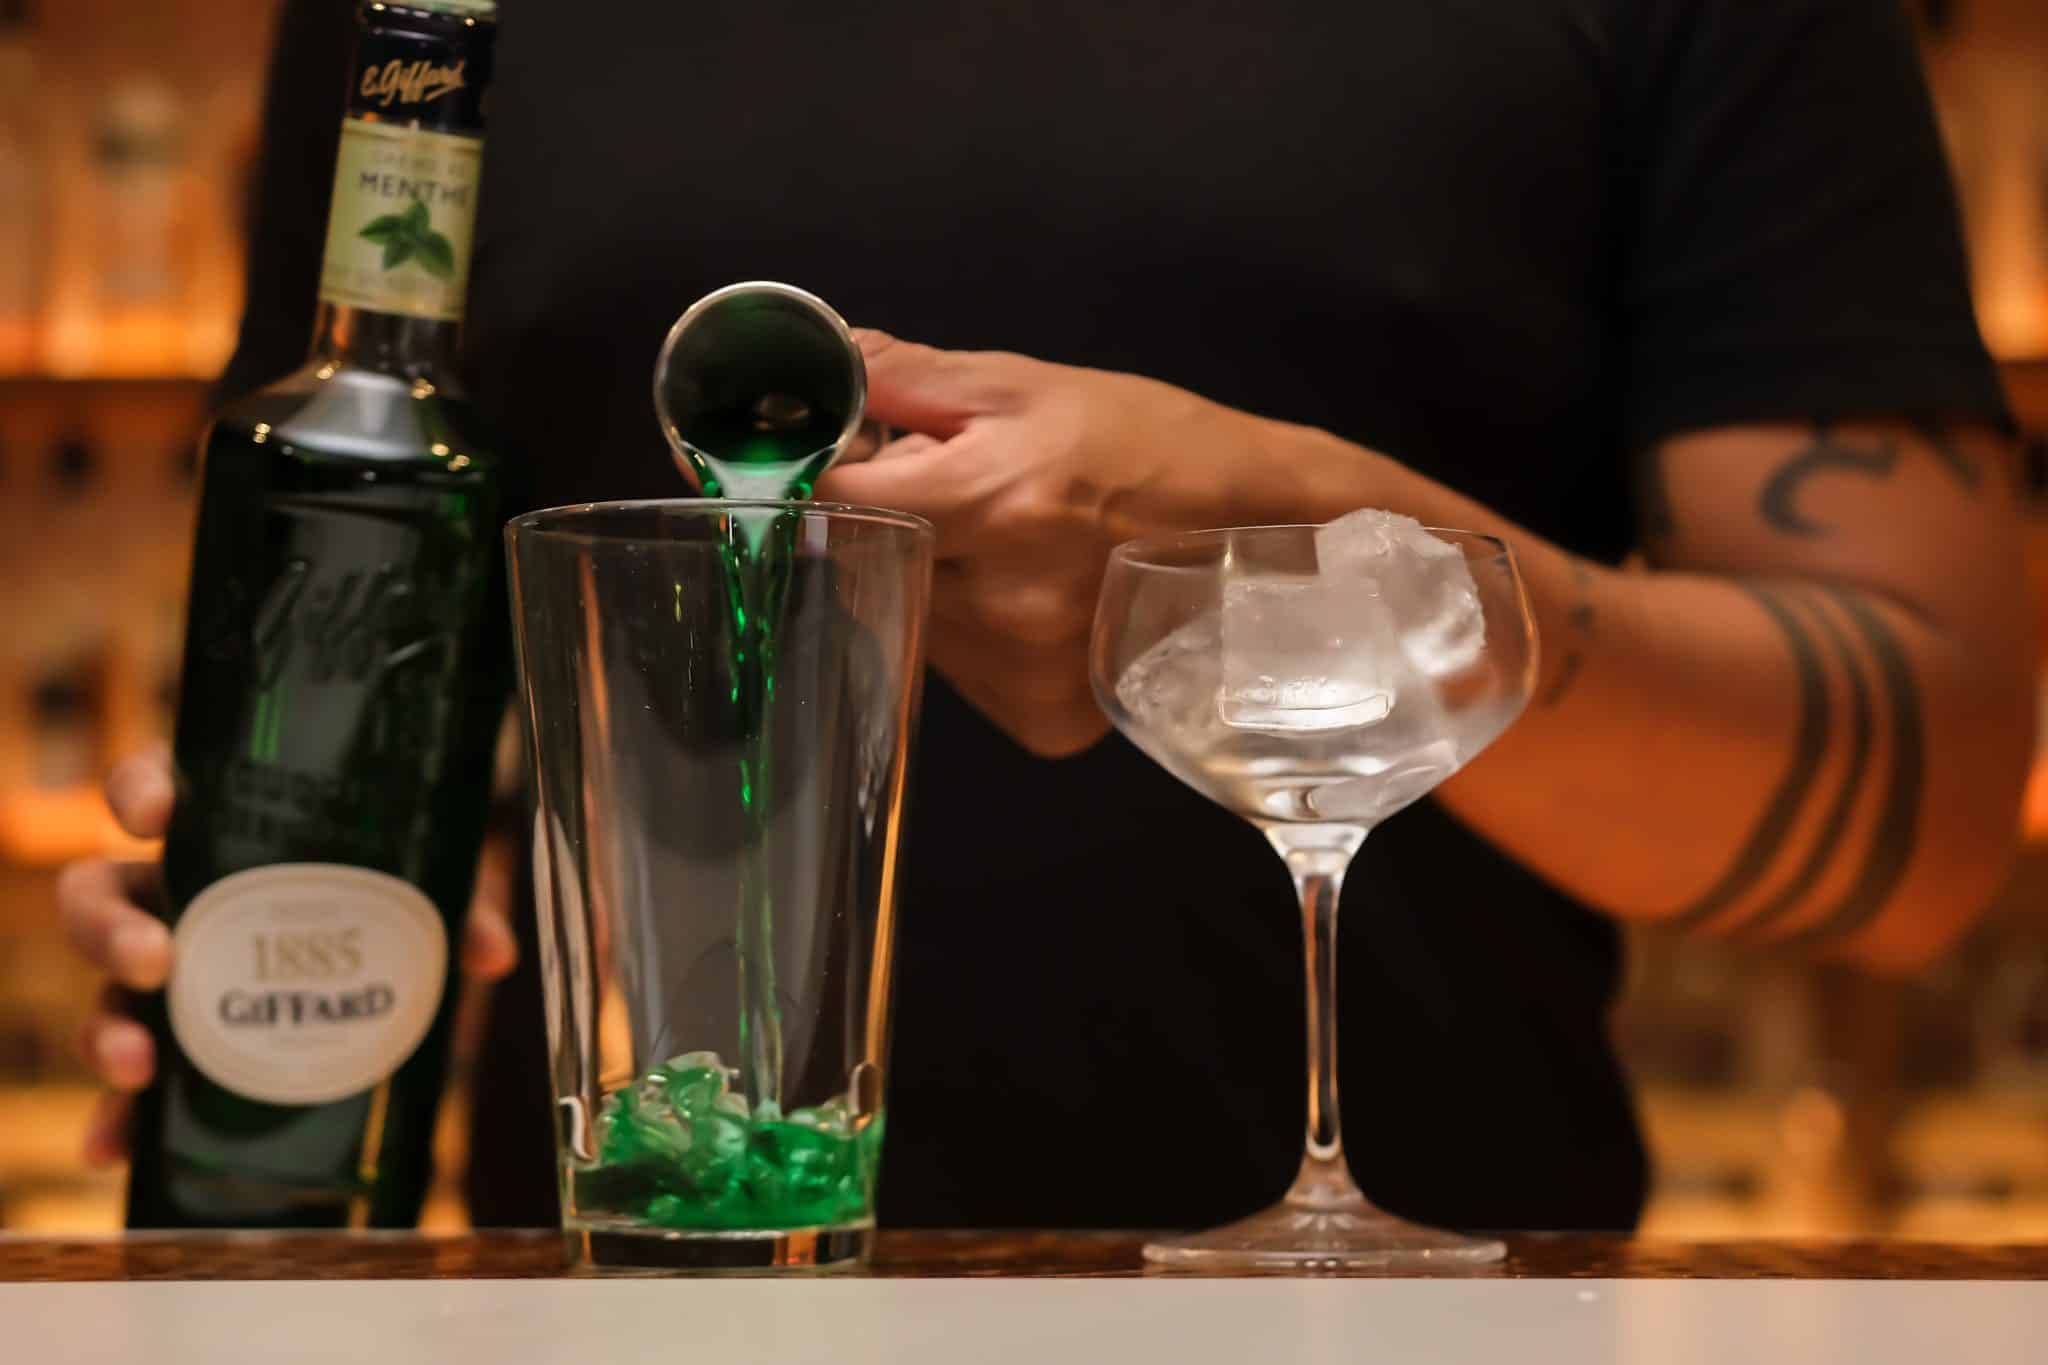 <p>Pour 1 oz of crème de menthe into the ice-filled shaker to give the drink its minty kick.</p>
